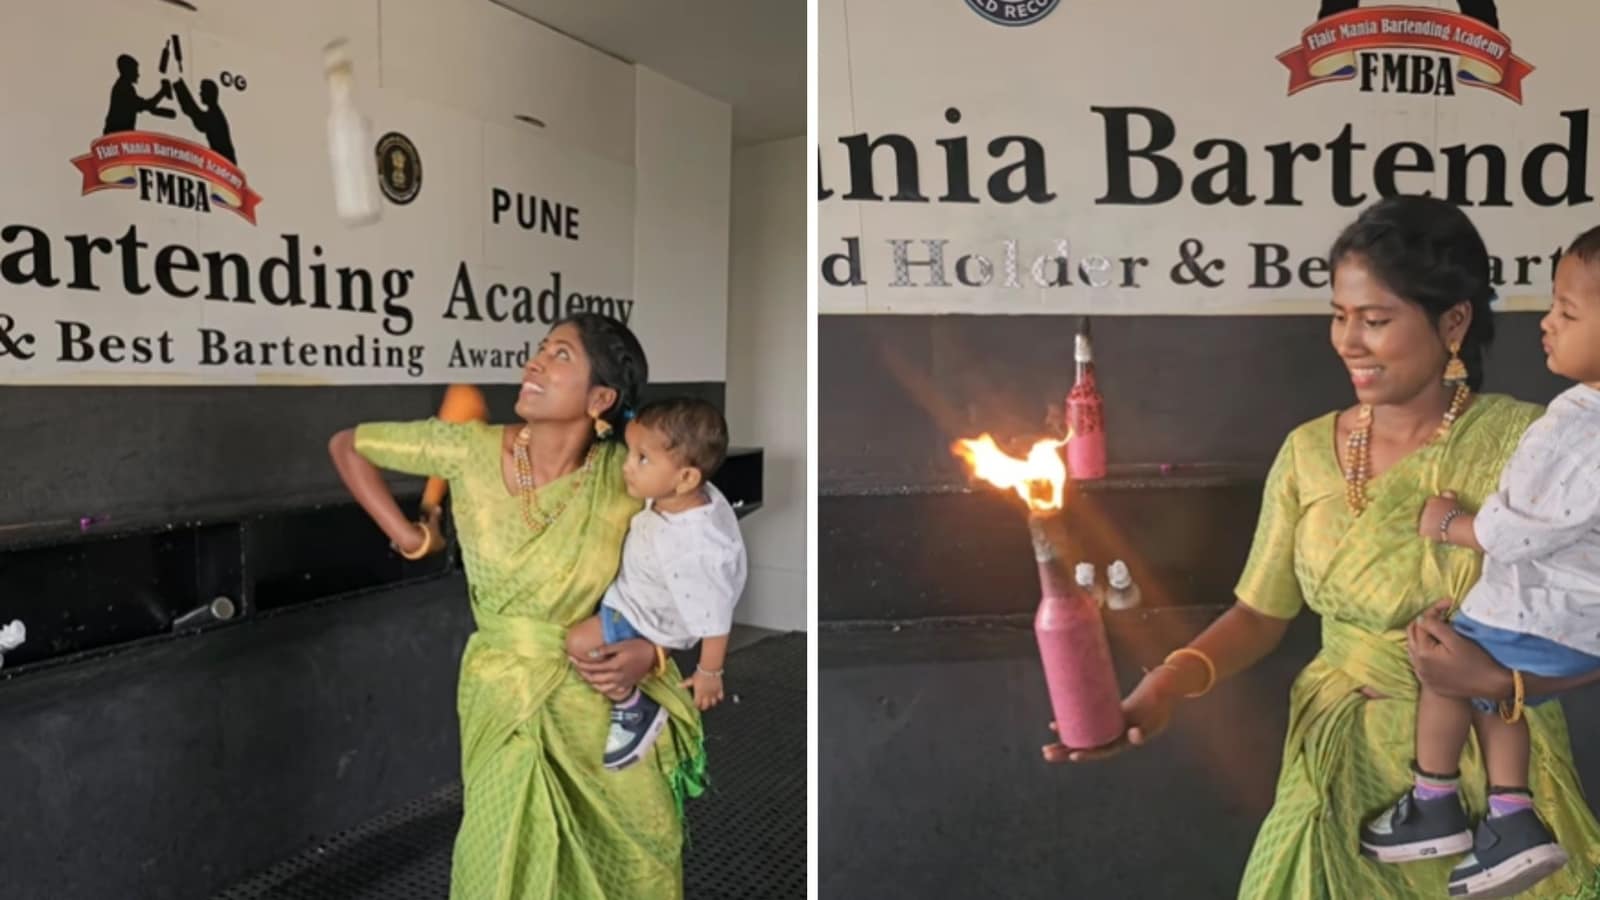 Viral video: Pune woman wears saree, holds baby while juggling glass bottles